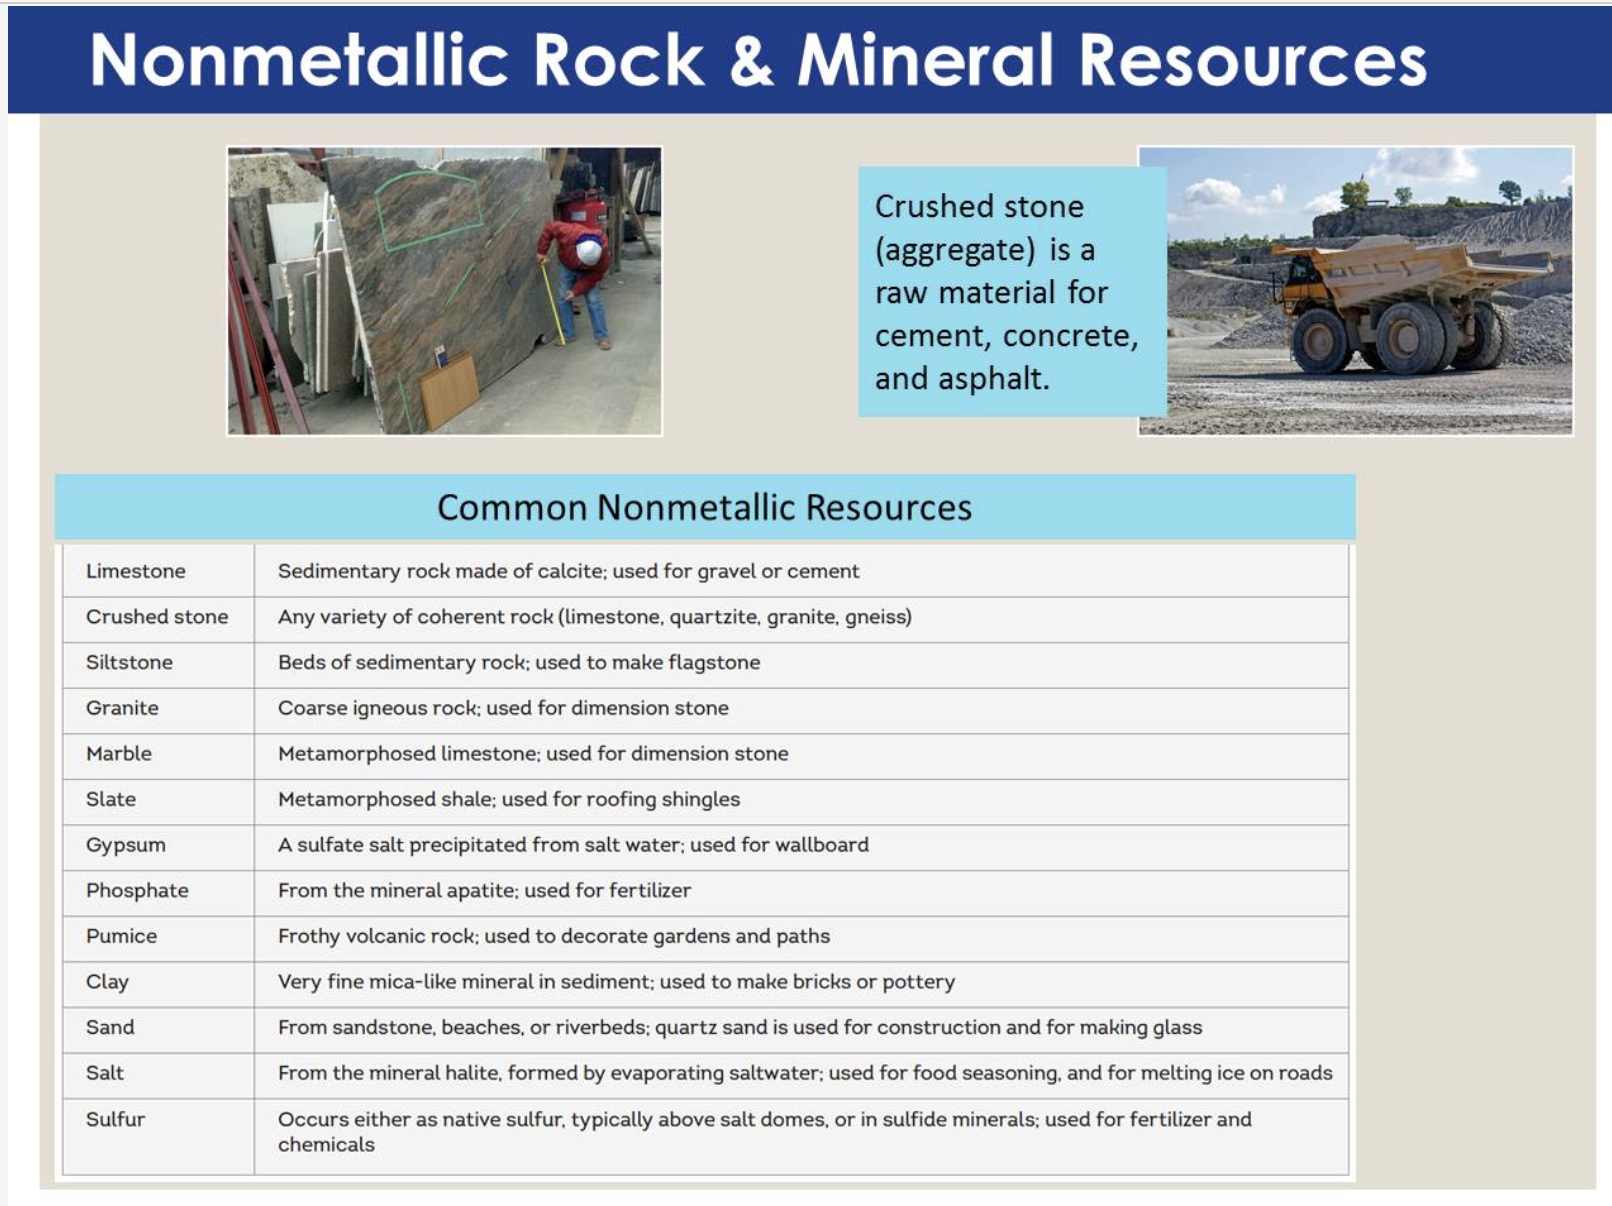 Nonmetallic Rock and Mineral Sources.png